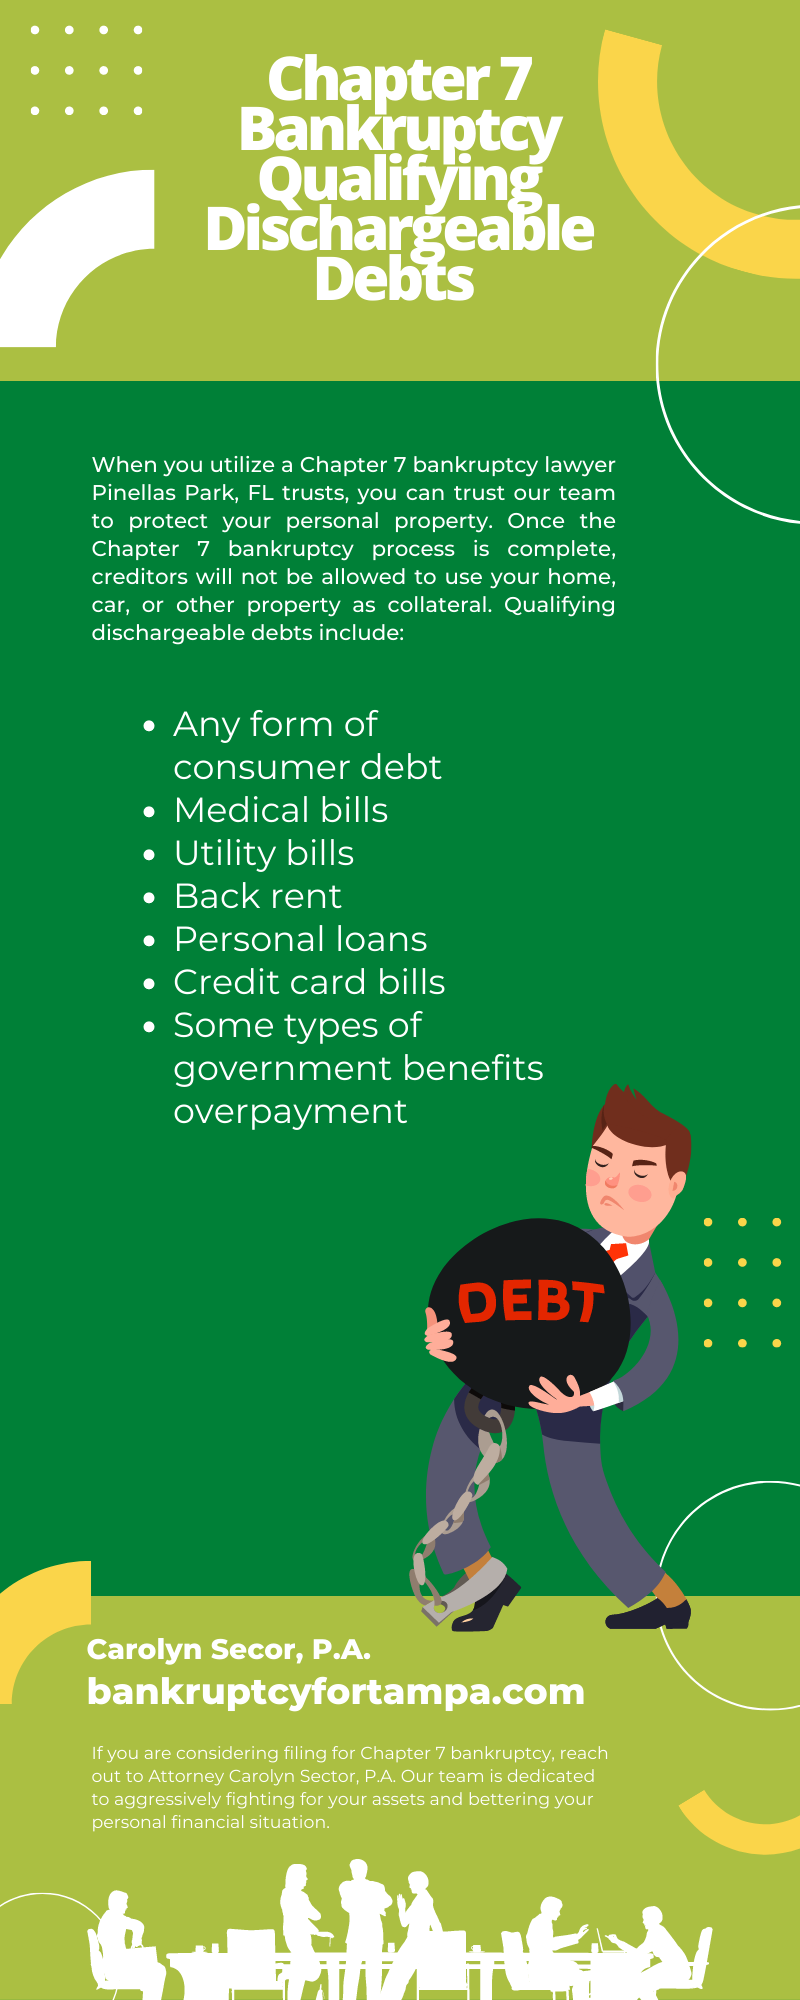 Chapter 7 Bankruptcy Qualifying Dischargeable Debts Infographic